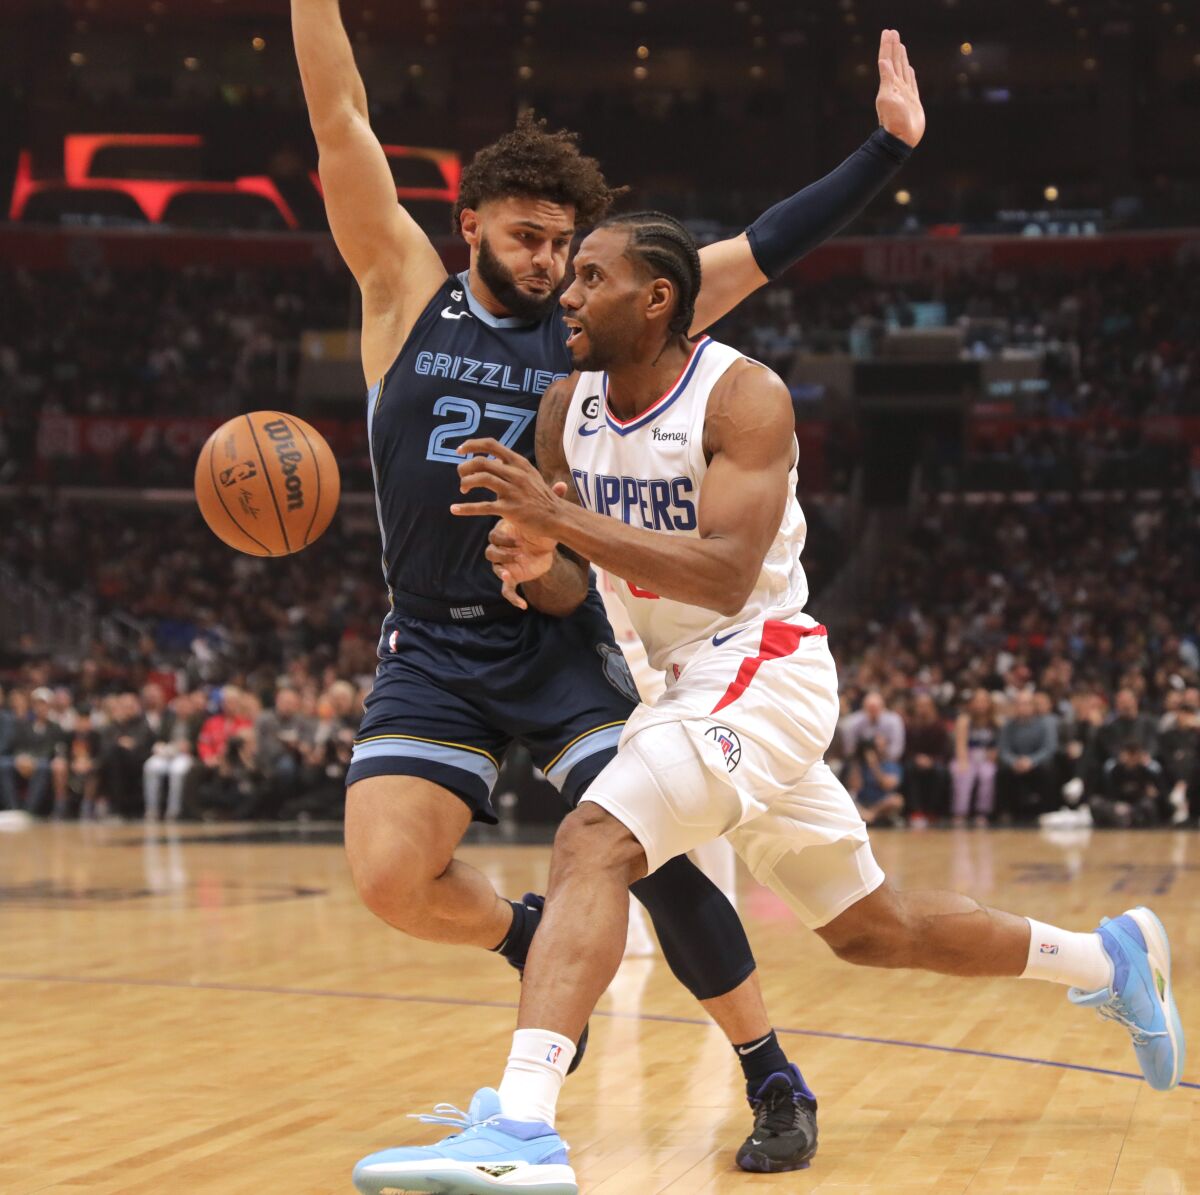 Clippers star Kawhi Leonard is fouled by Grizzlies' David Roddy in the second quarter on Sunday.